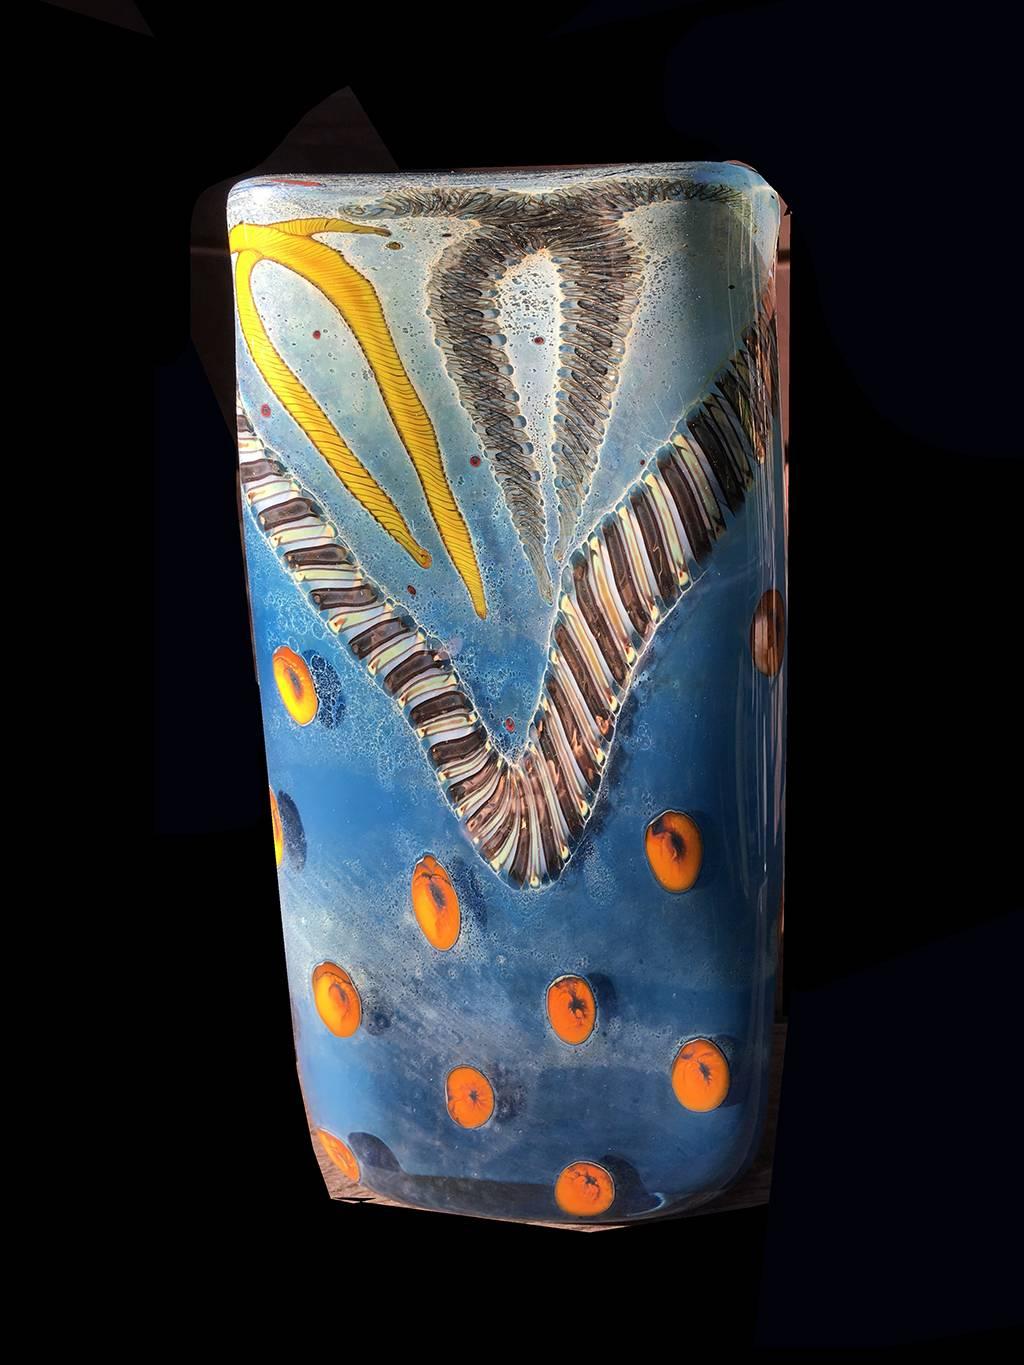 Contemporary studio art glass vase by Kenny Walton 

Contemporary studio glass vase by Kenny Walton (? - 2010), the rectangular vase rendered in various tones of blue, with orange, brown and yellow elements winding along and dotting the